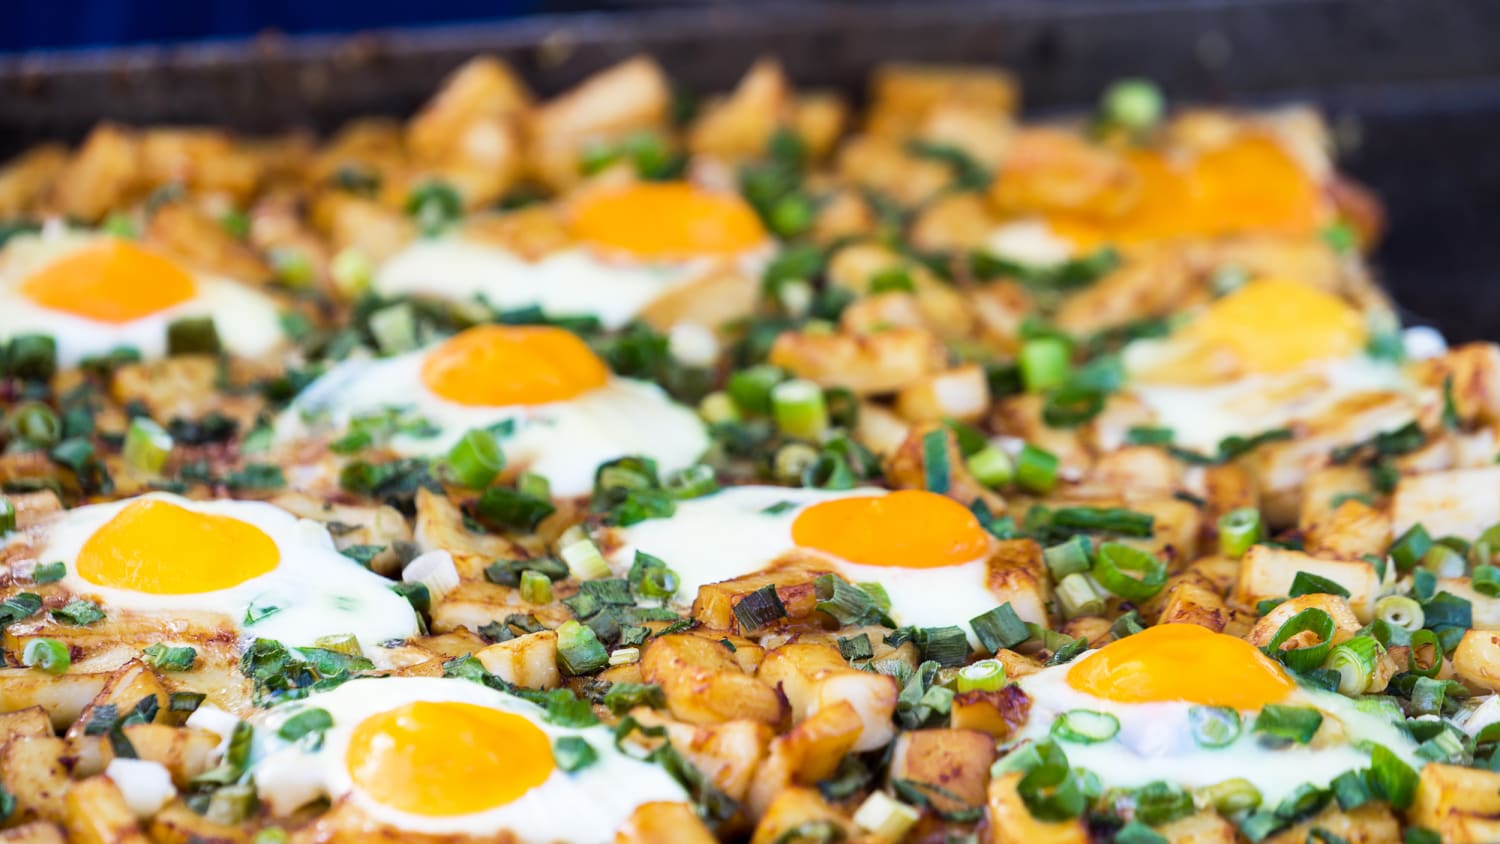 18 Cozy Sheet Pan Breakfast Recipes For Easy Weight Loss — Eat This Not That